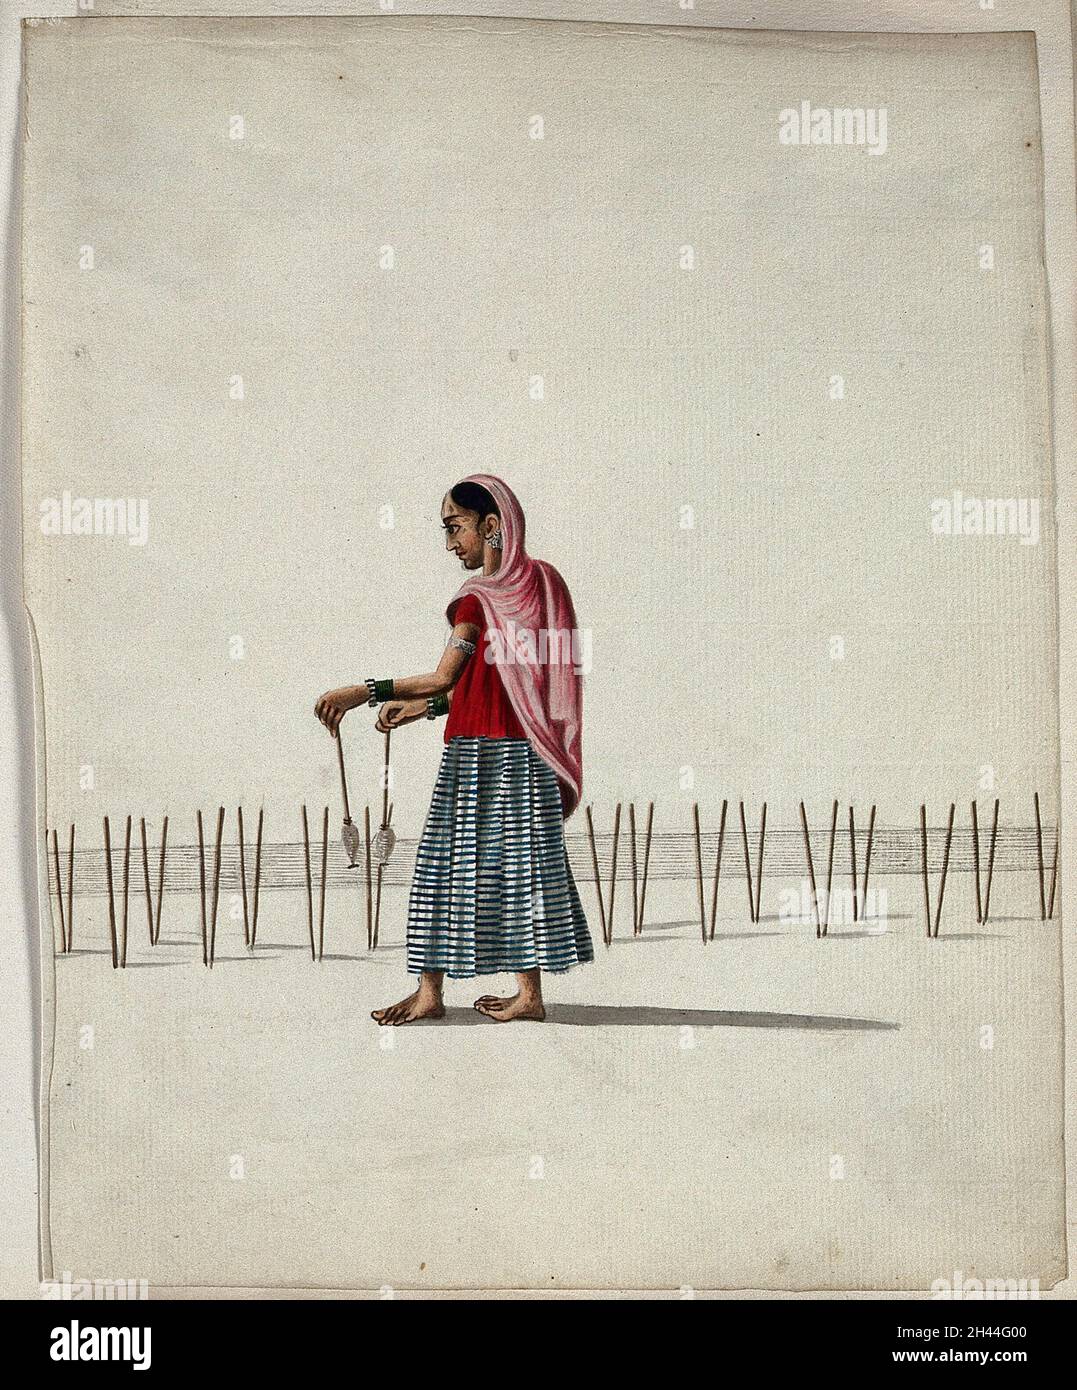 A woman winding thread onto spindles (?). Gouache painting by an Indian artist. Stock Photo